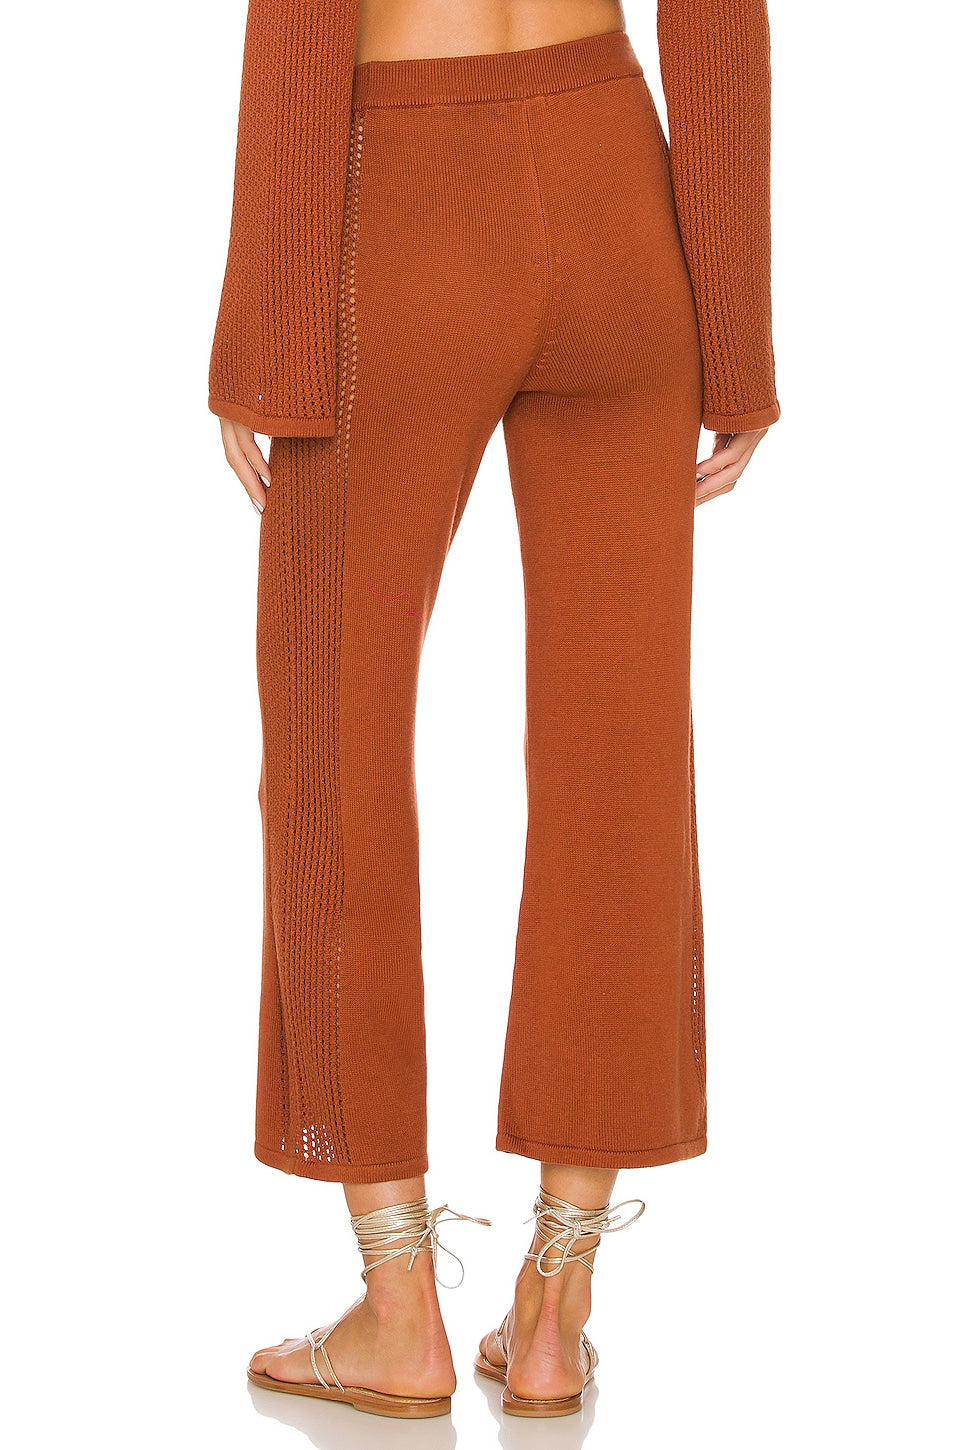 Abria Pant in CLAY